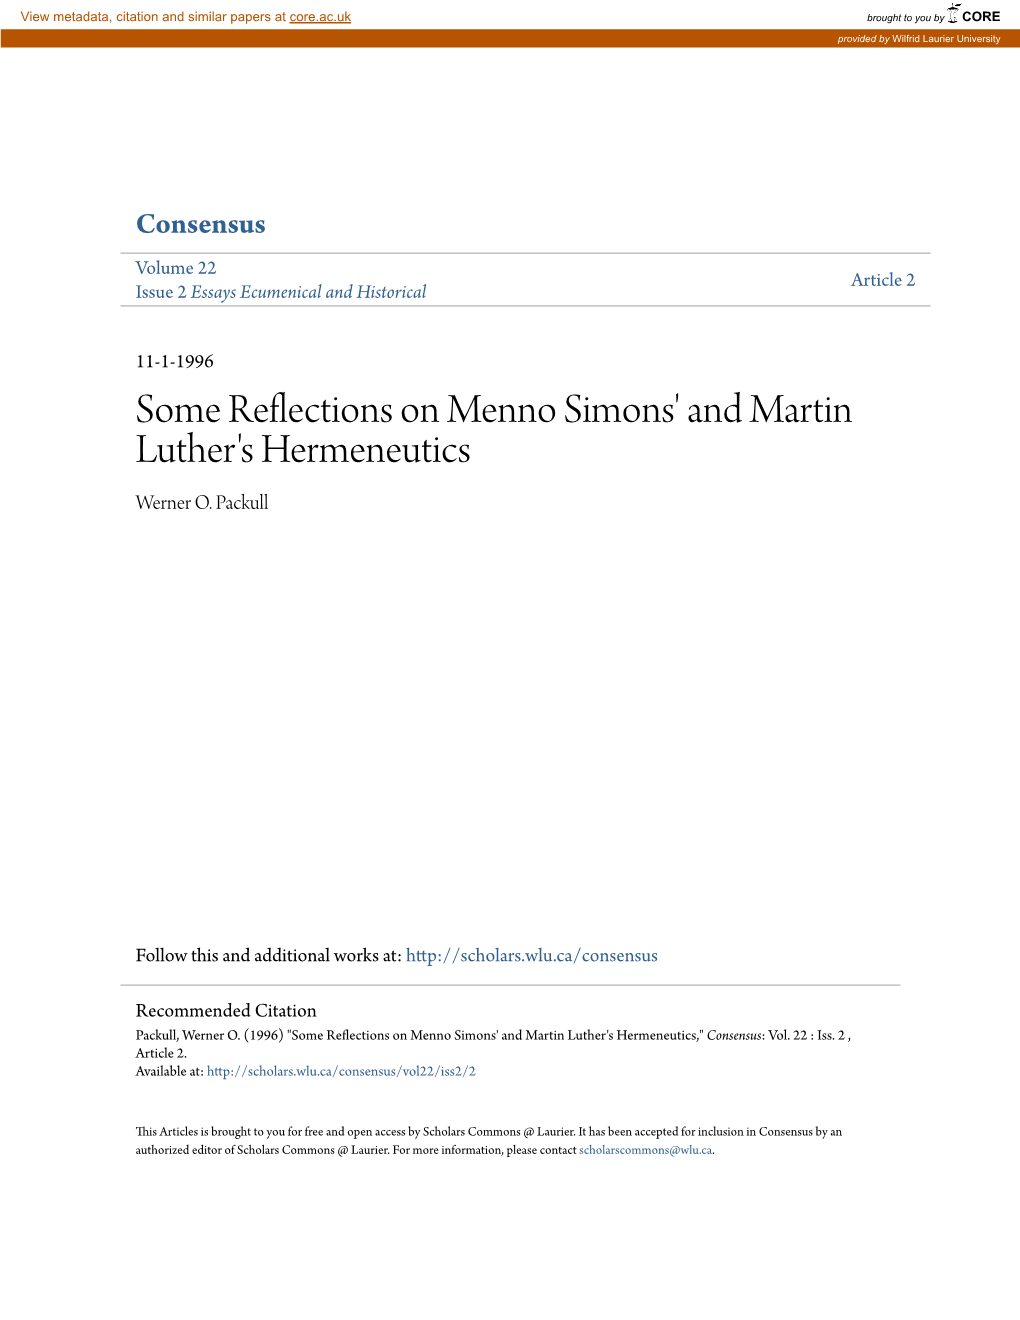 Some Reflections on Menno Simons' and Martin Luther's Hermeneutics Werner O